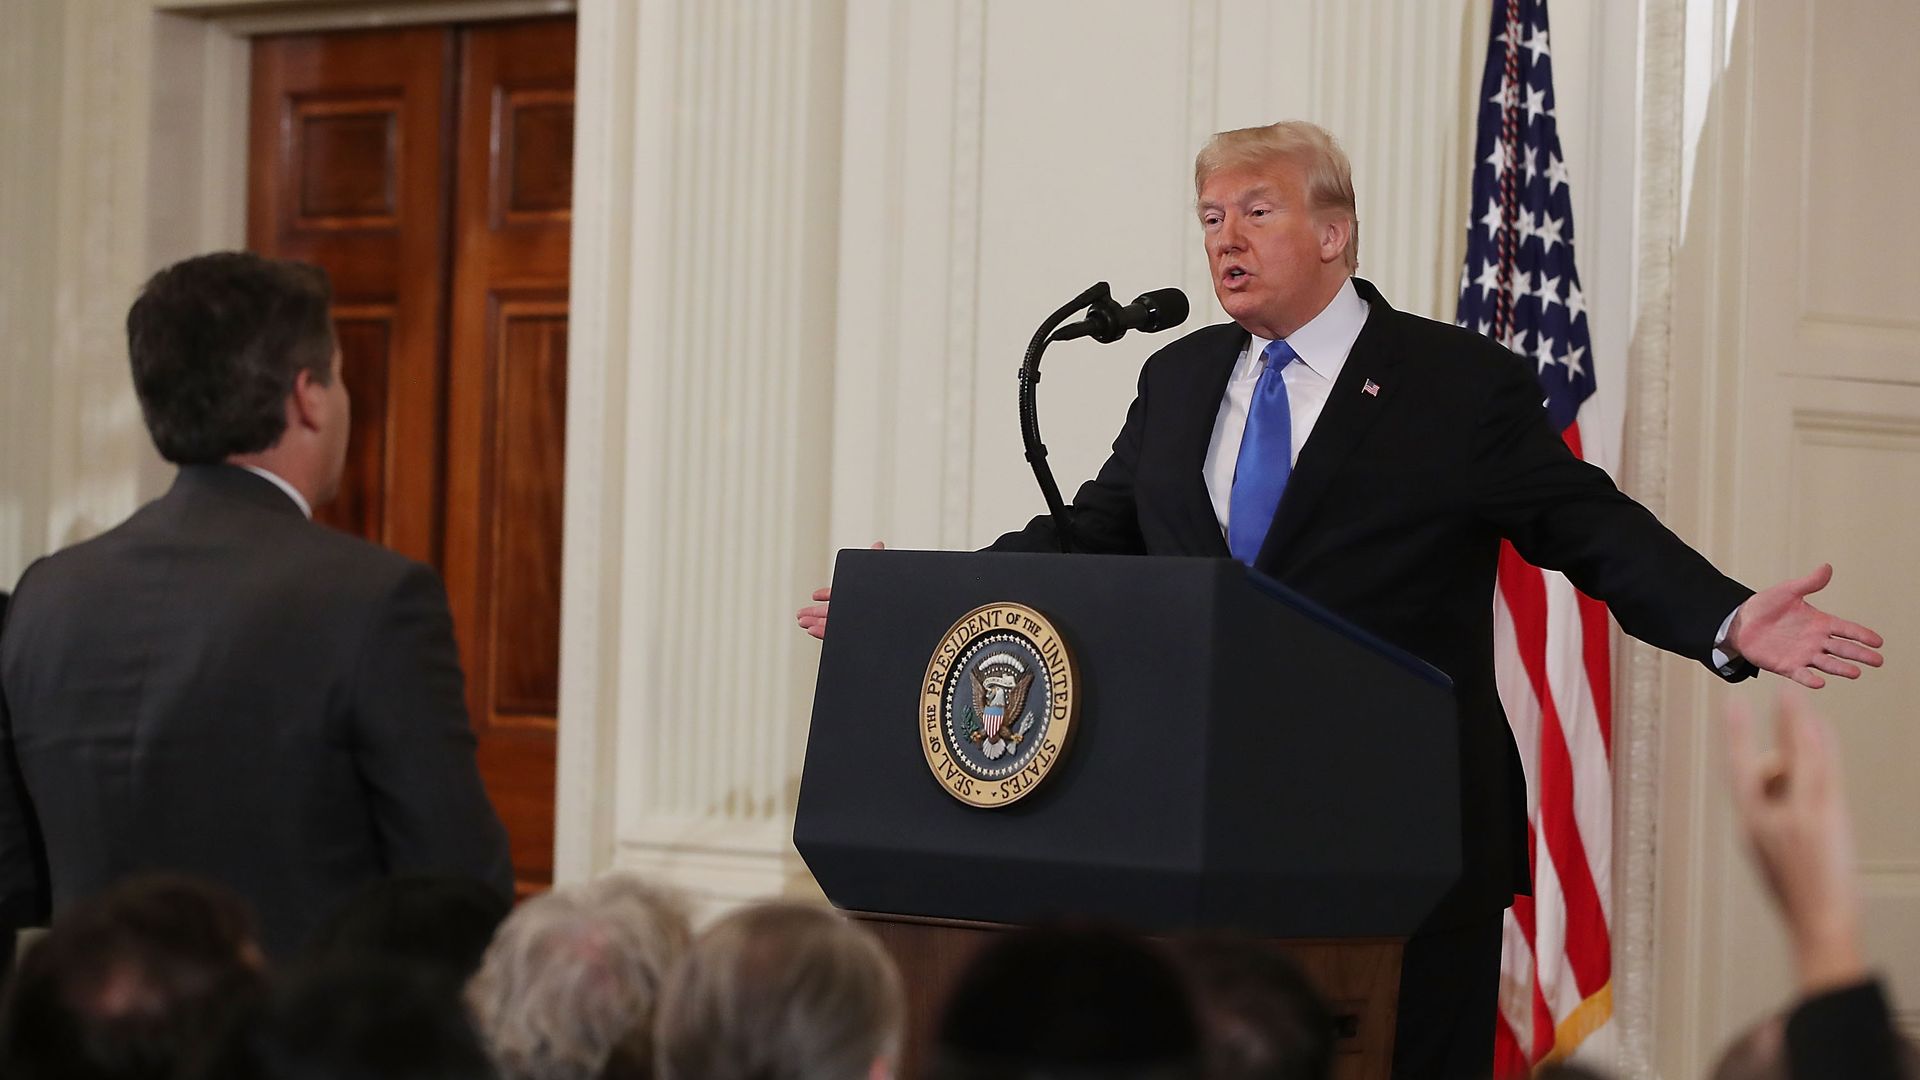 President Trump spars with CNN's Jim Acosta during a press conference last week